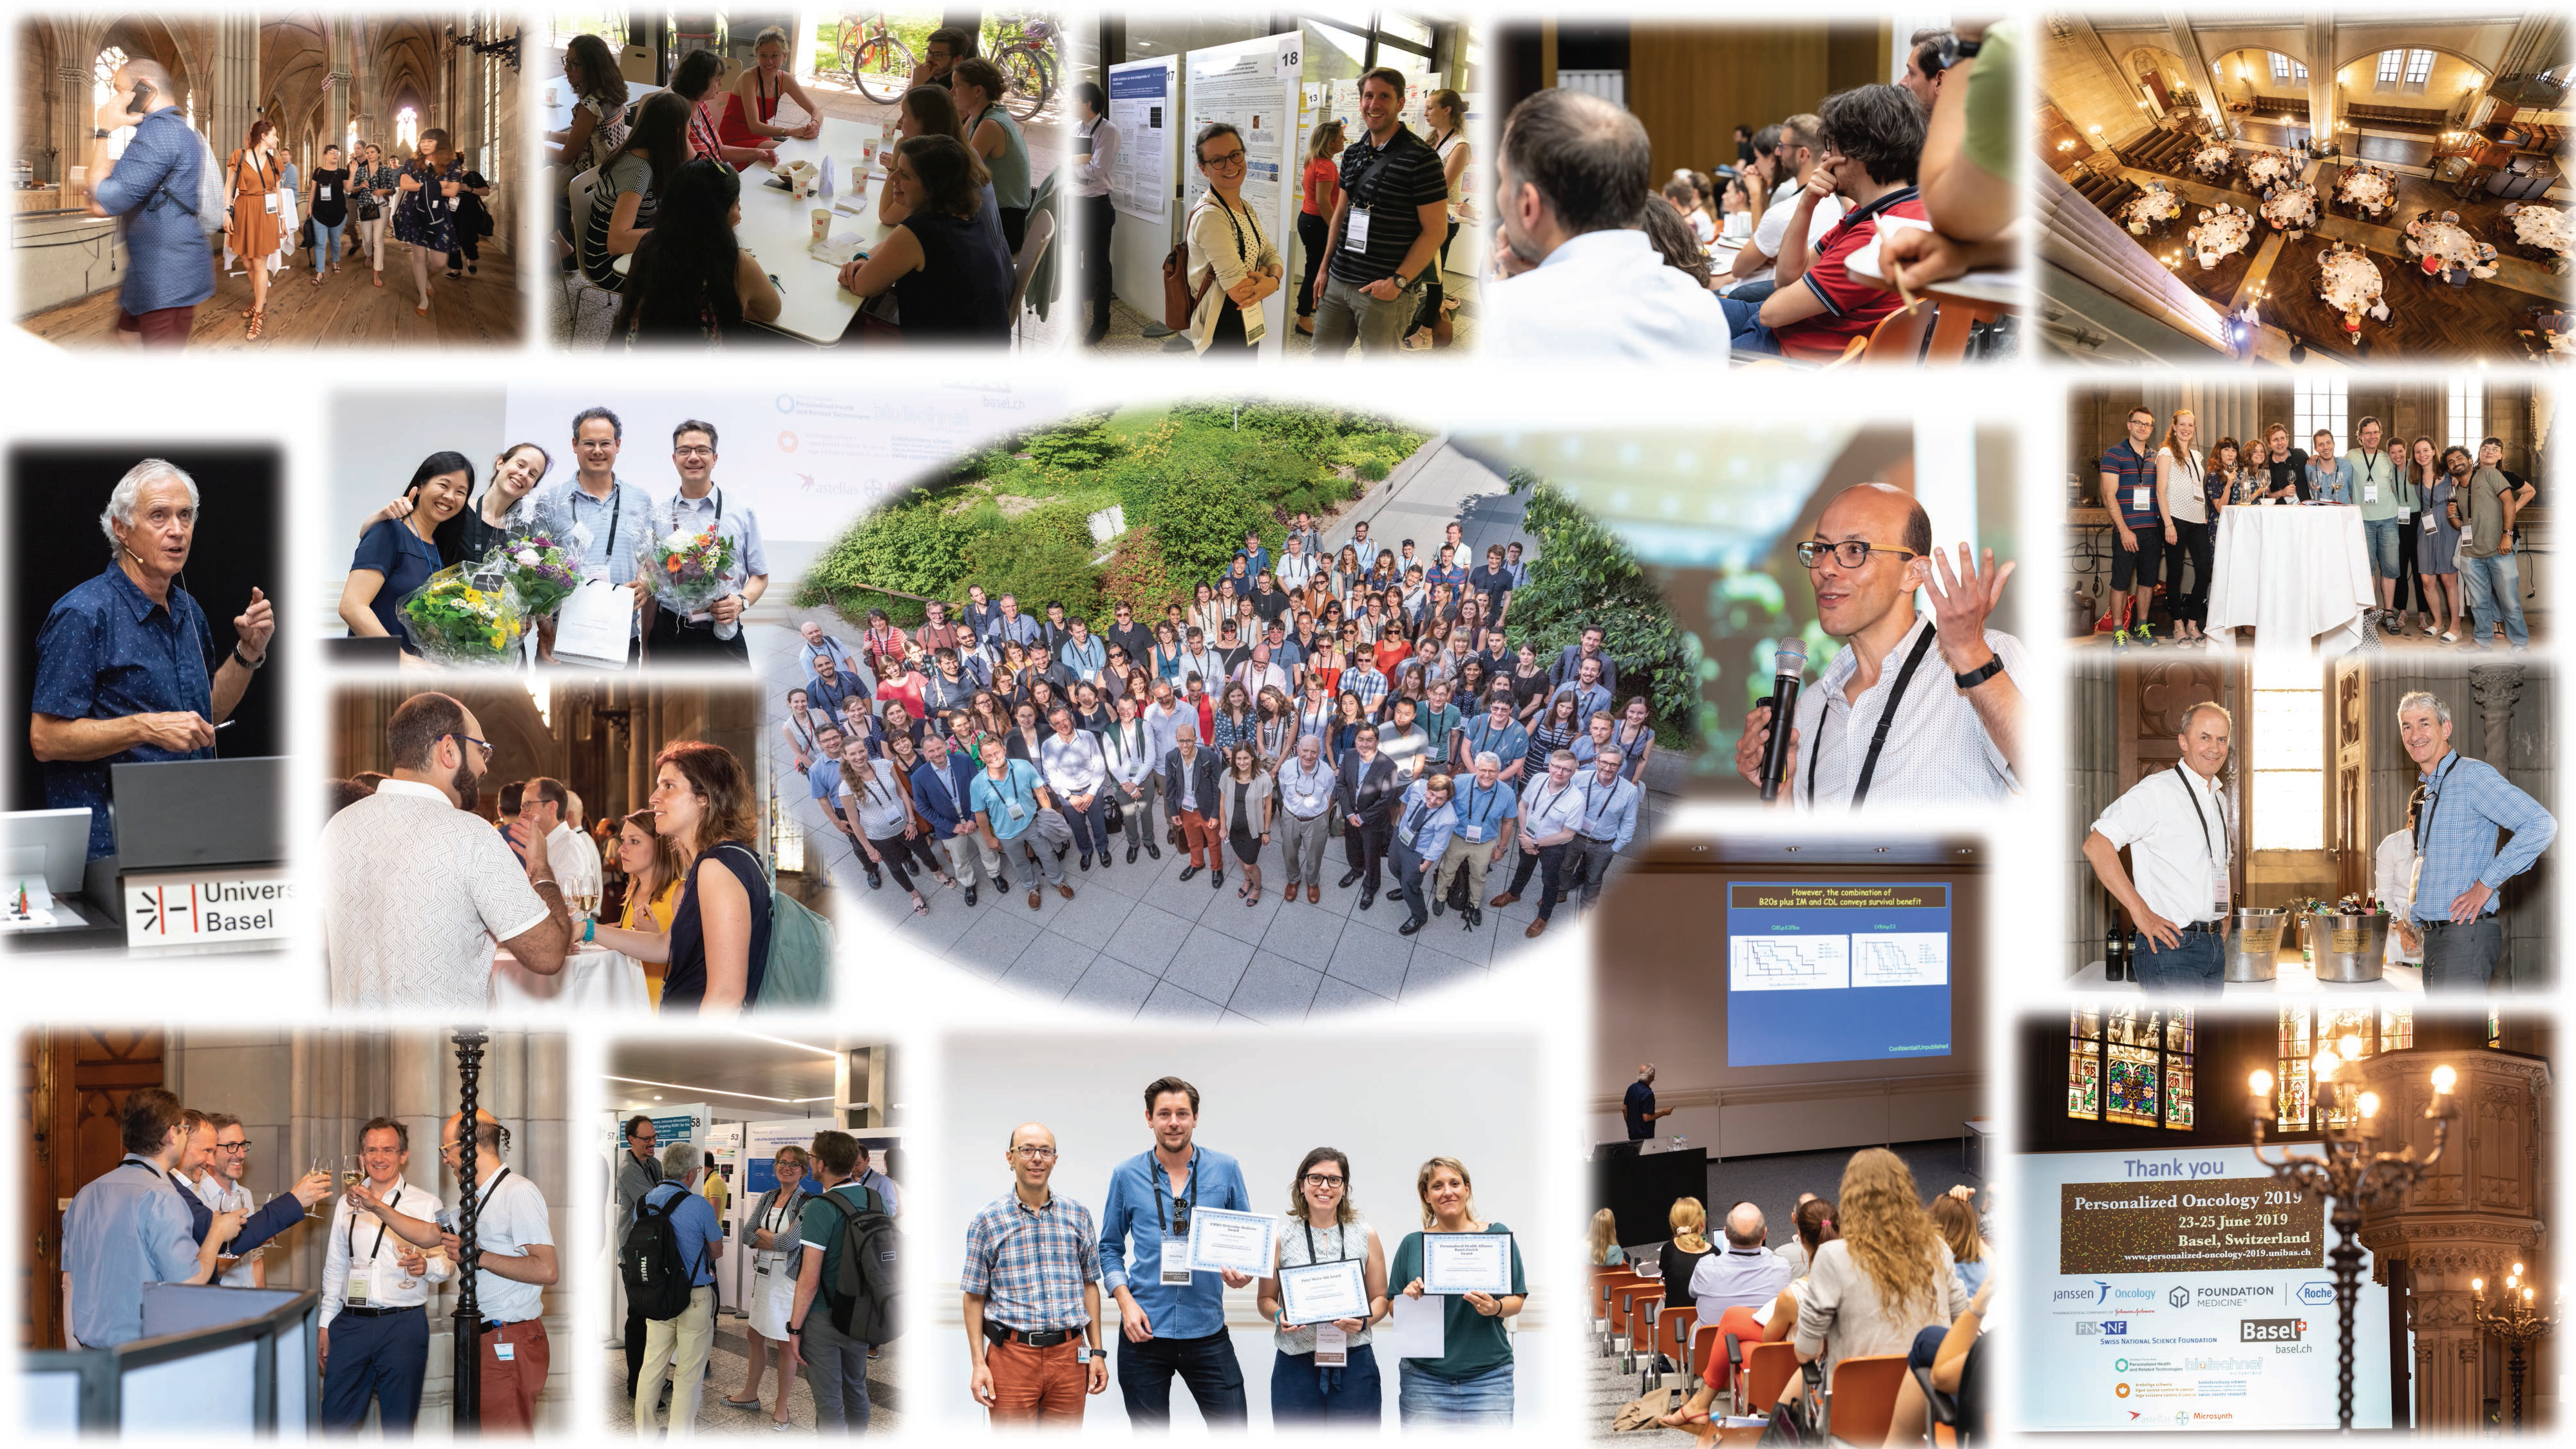 Collage of selected Photos of Personalized Oncology Conference 2019